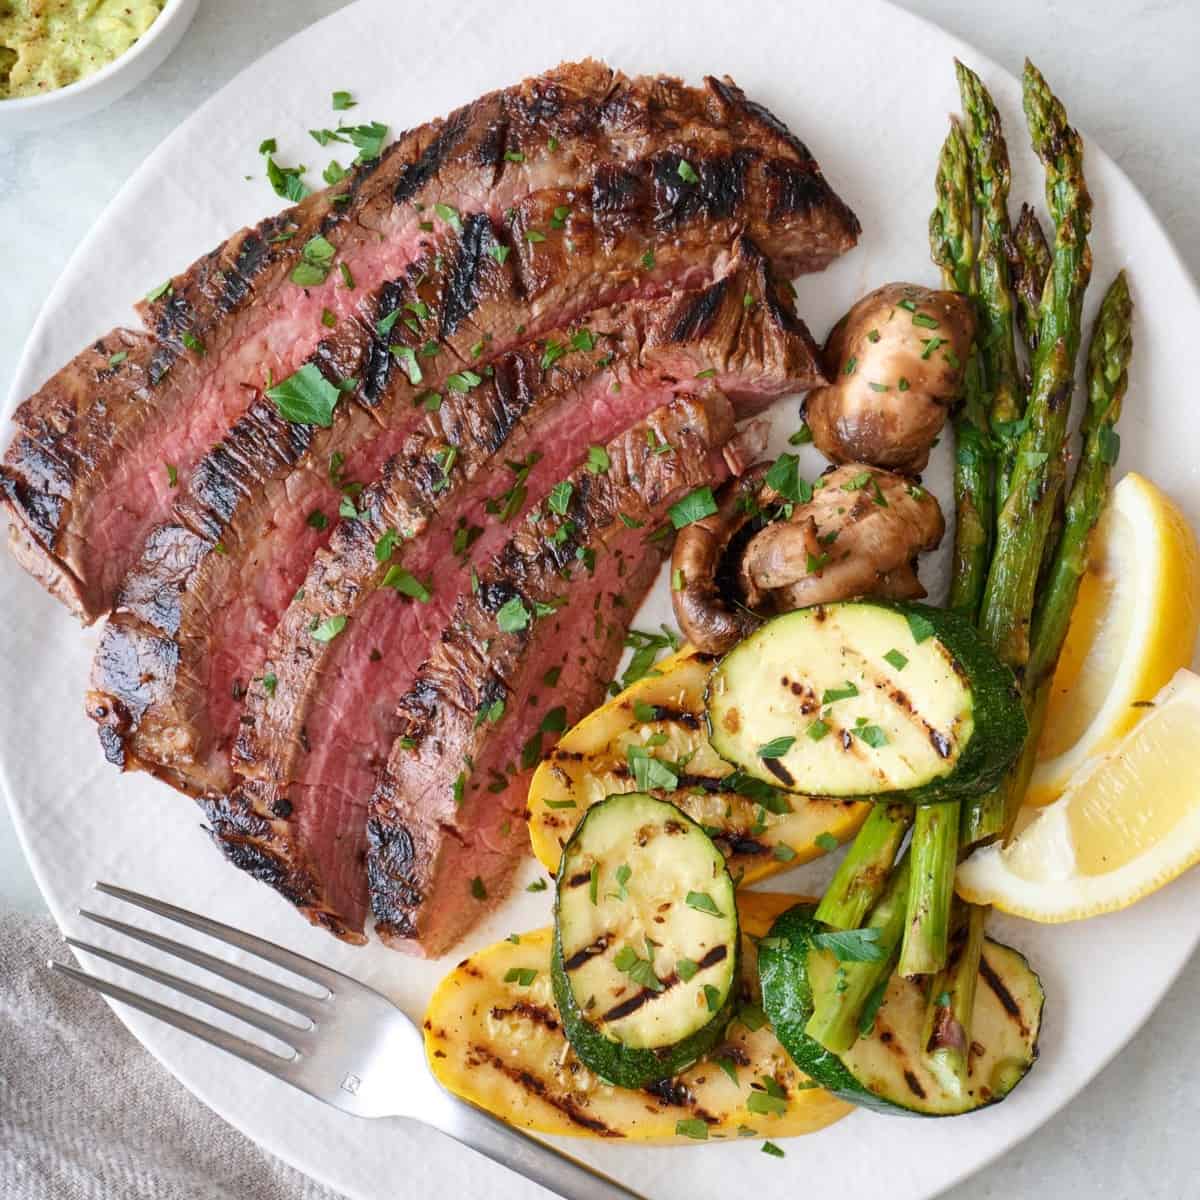 Sliced flank steak on a plate with grilled veggies.